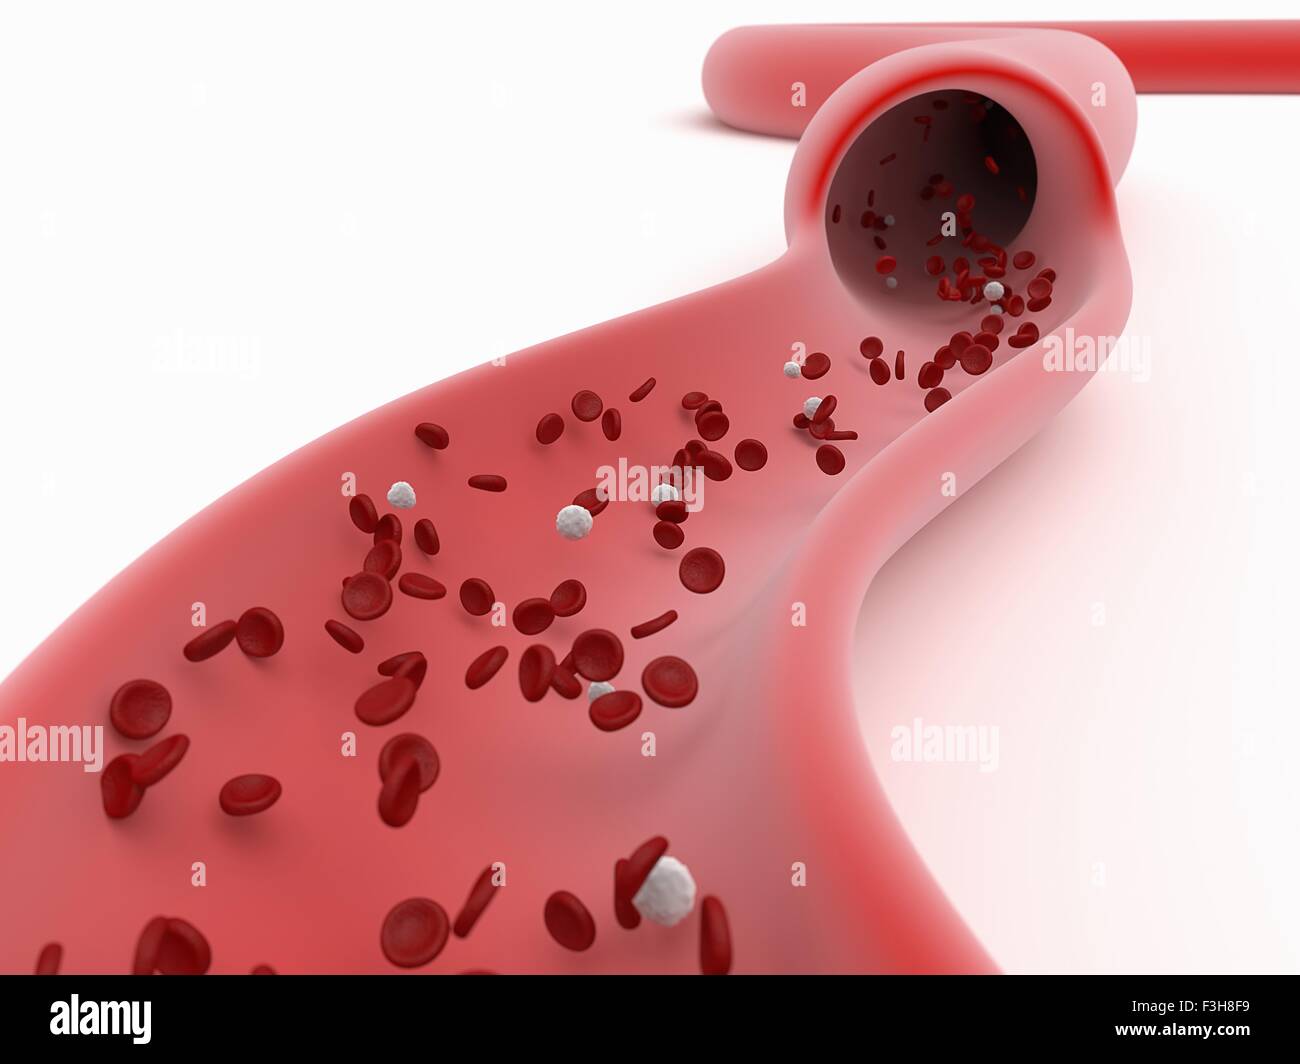 3D illustration showing the red blood cell flow in a vessel Stock Photo